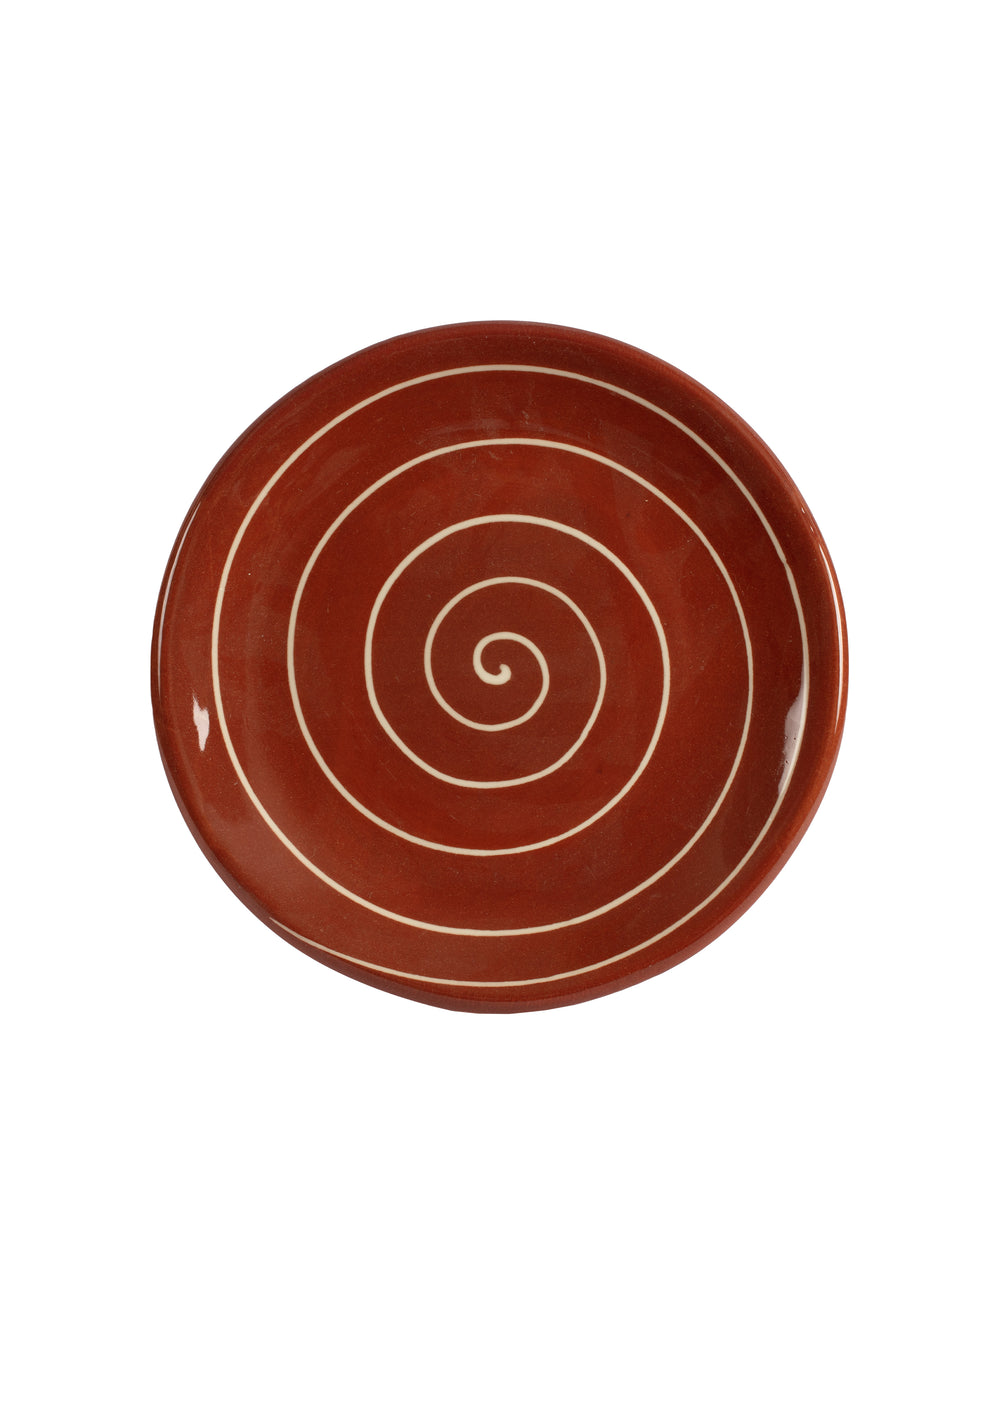 Clay plate with white spiral